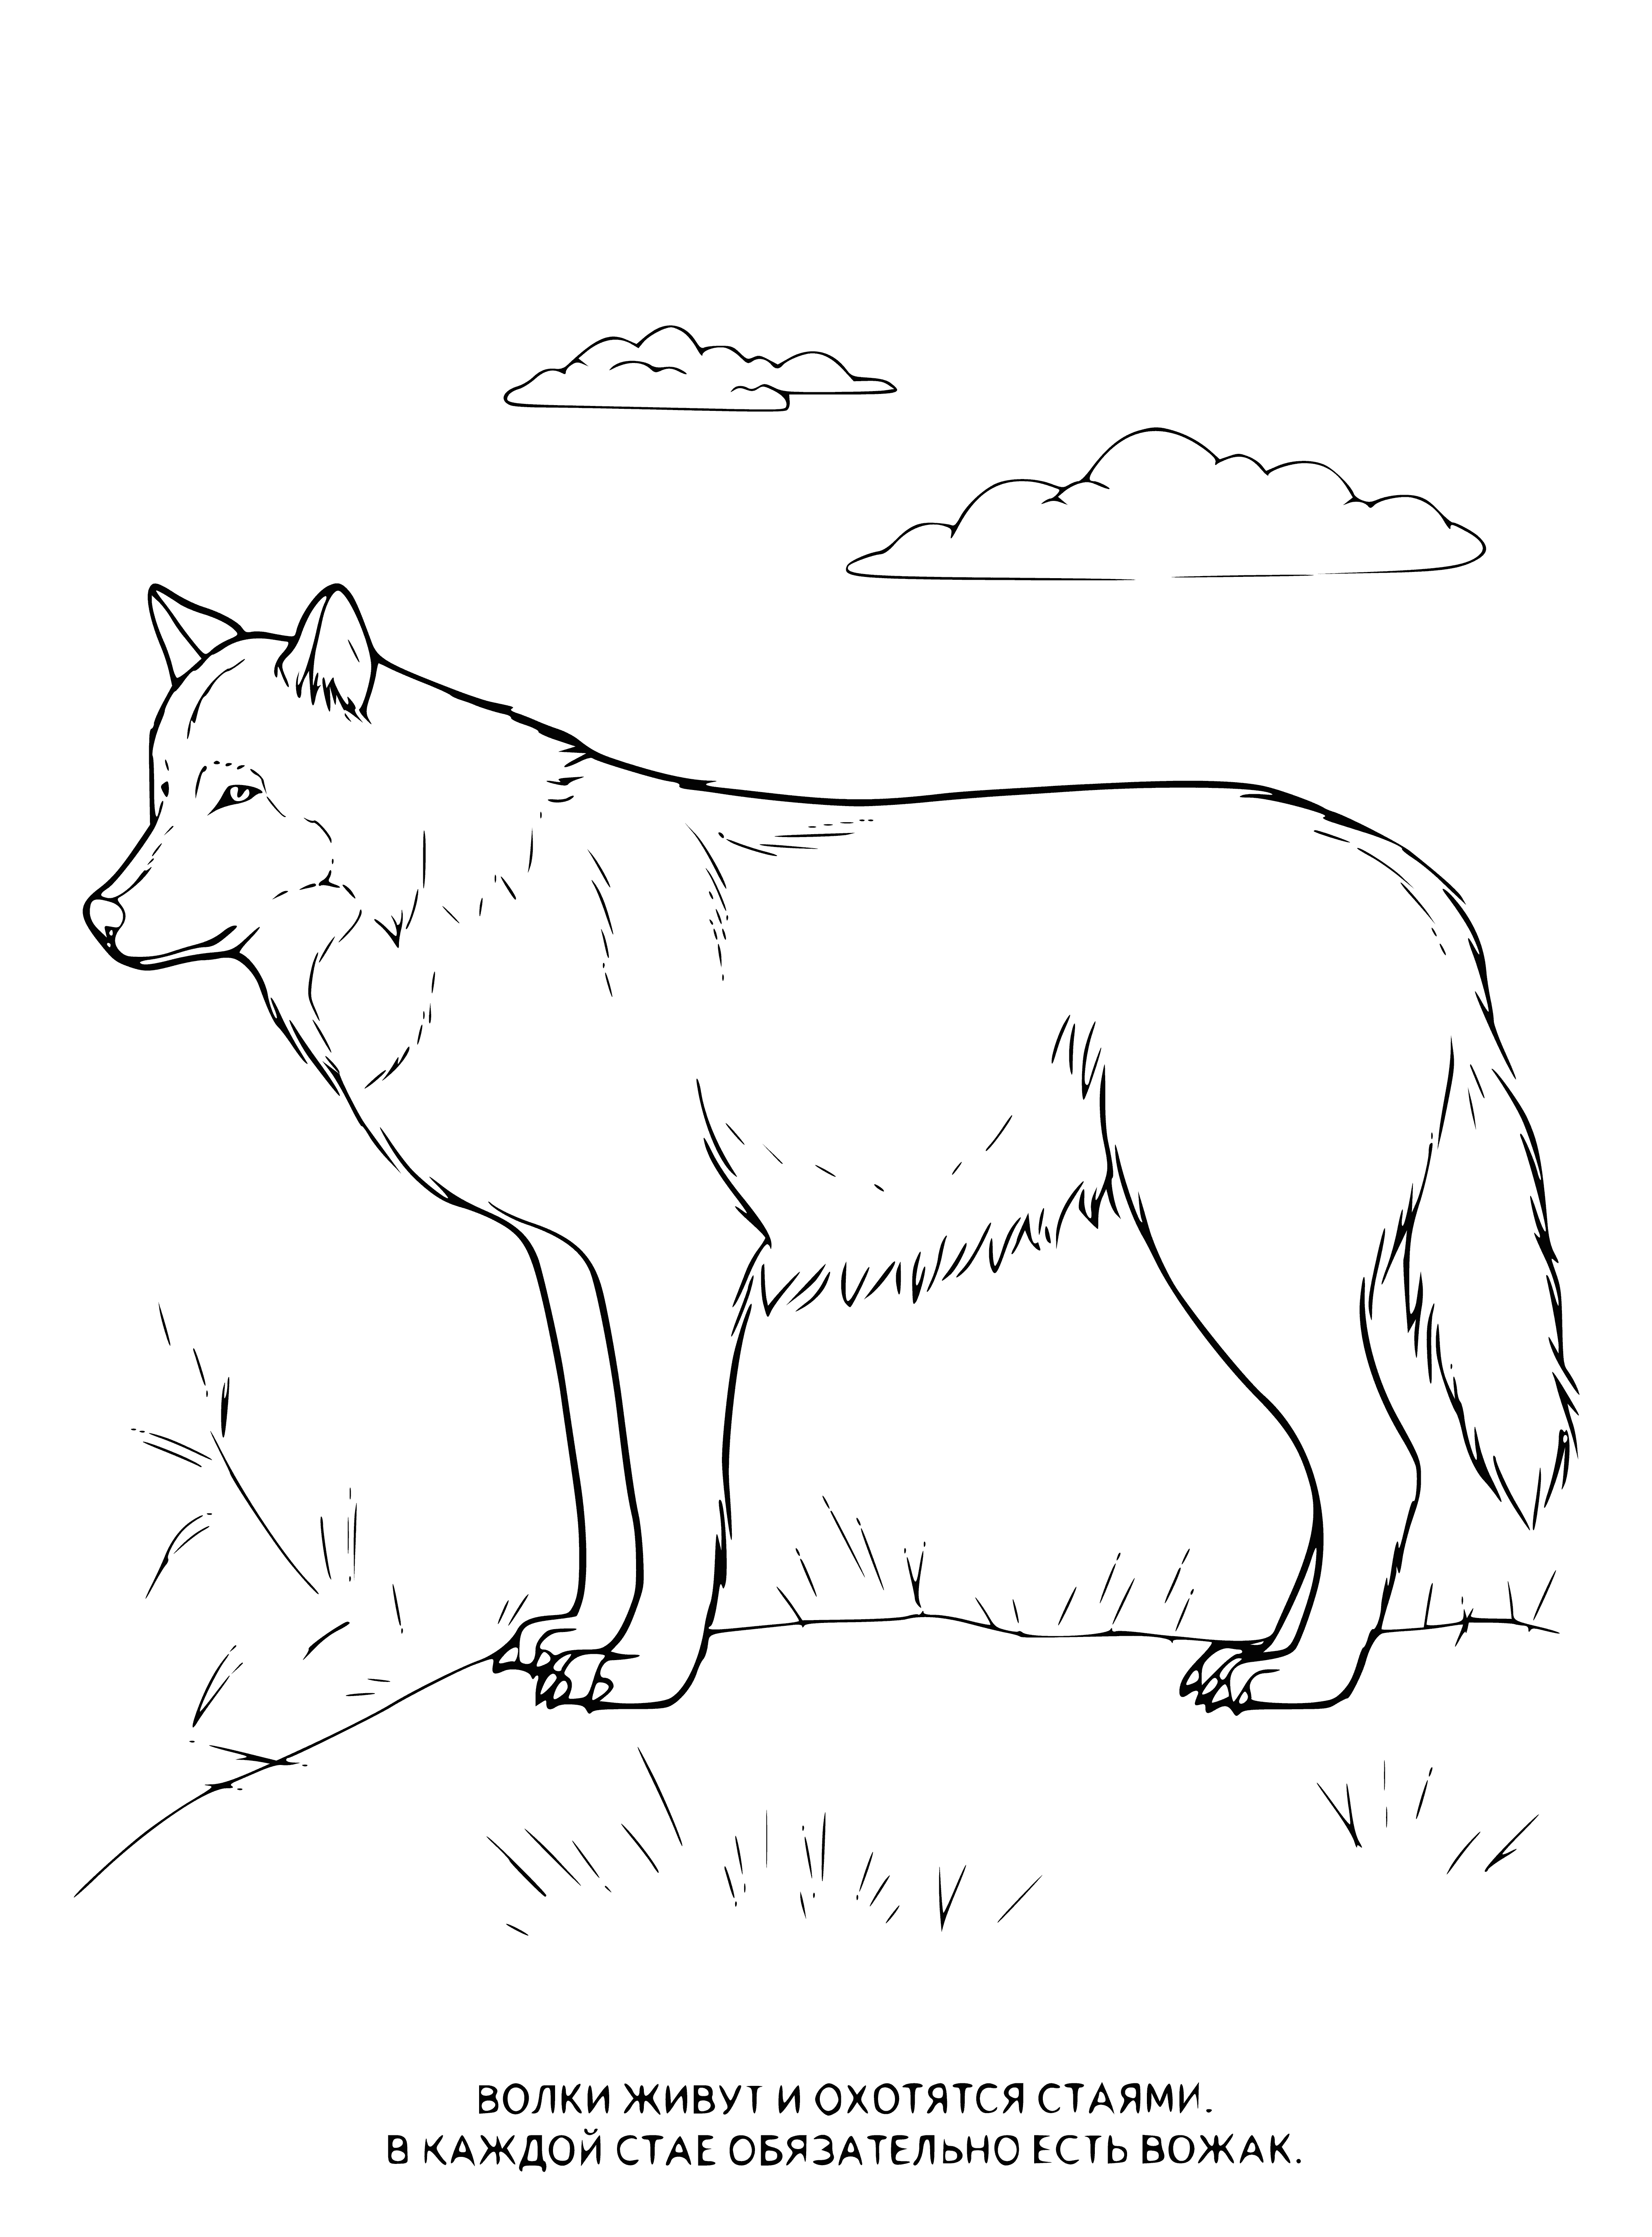 coloring page: Wolves are members of the canine family, are similar to domestic dogs but larger & hunt in packs. They're known for their howling.